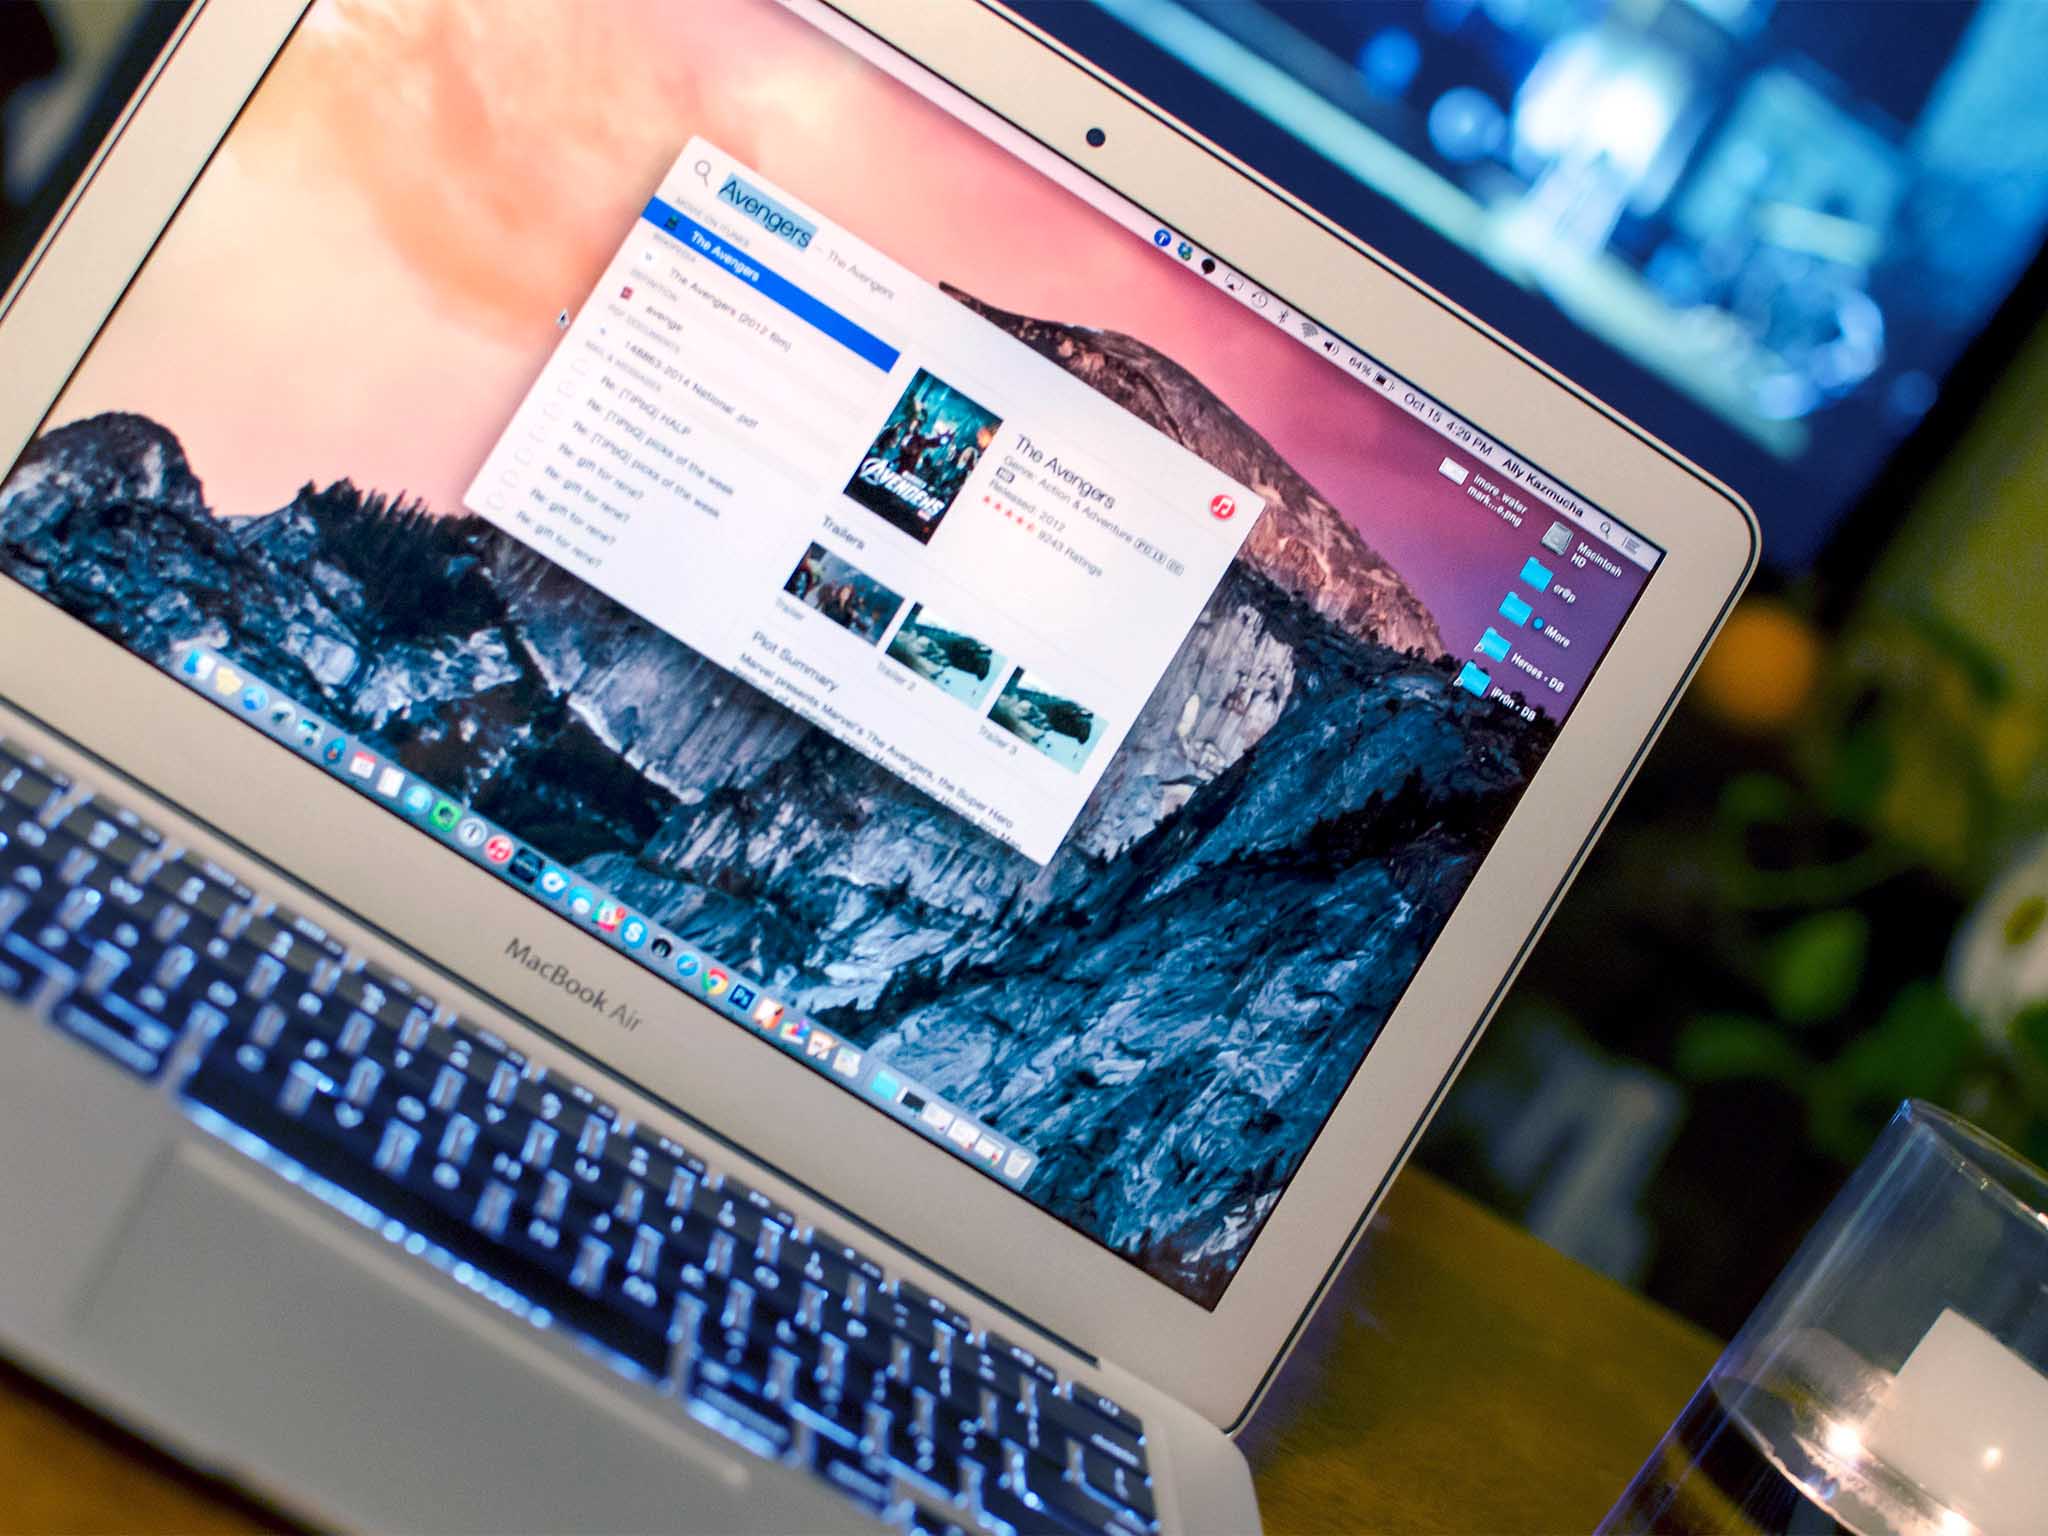 Yosemite, iOS 8, Spotlight, and Privacy: What you need to know